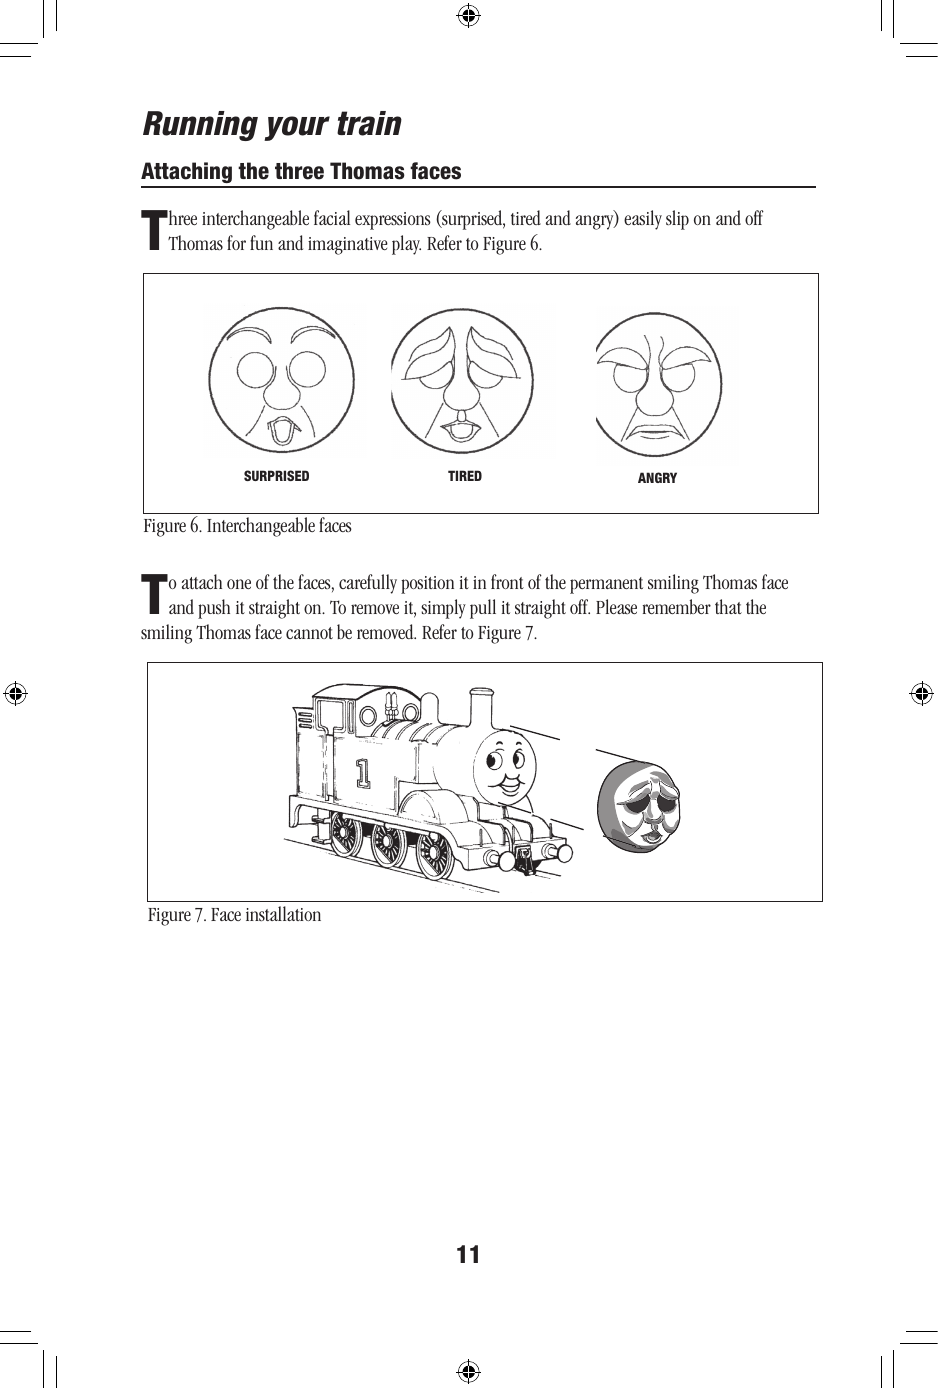 11Attaching the three Thomas facesThreeinterchangeablefacialexpressions(surprised,tiredandangry)easilysliponandoffThomas for fun and imaginative play. Refer to Figure 6.Figure 6. Interchangeable facesRunning your trainTIRED ANGRYSURPRISEDTo attach one of the faces, carefully position it in front of the permanent smiling Thomas face andpushitstraighton.Toremoveit,simplypullitstraightoff.Pleaserememberthatthesmiling Thomas face cannot be removed. Refer to Figure 7.Figure 7. Face installation